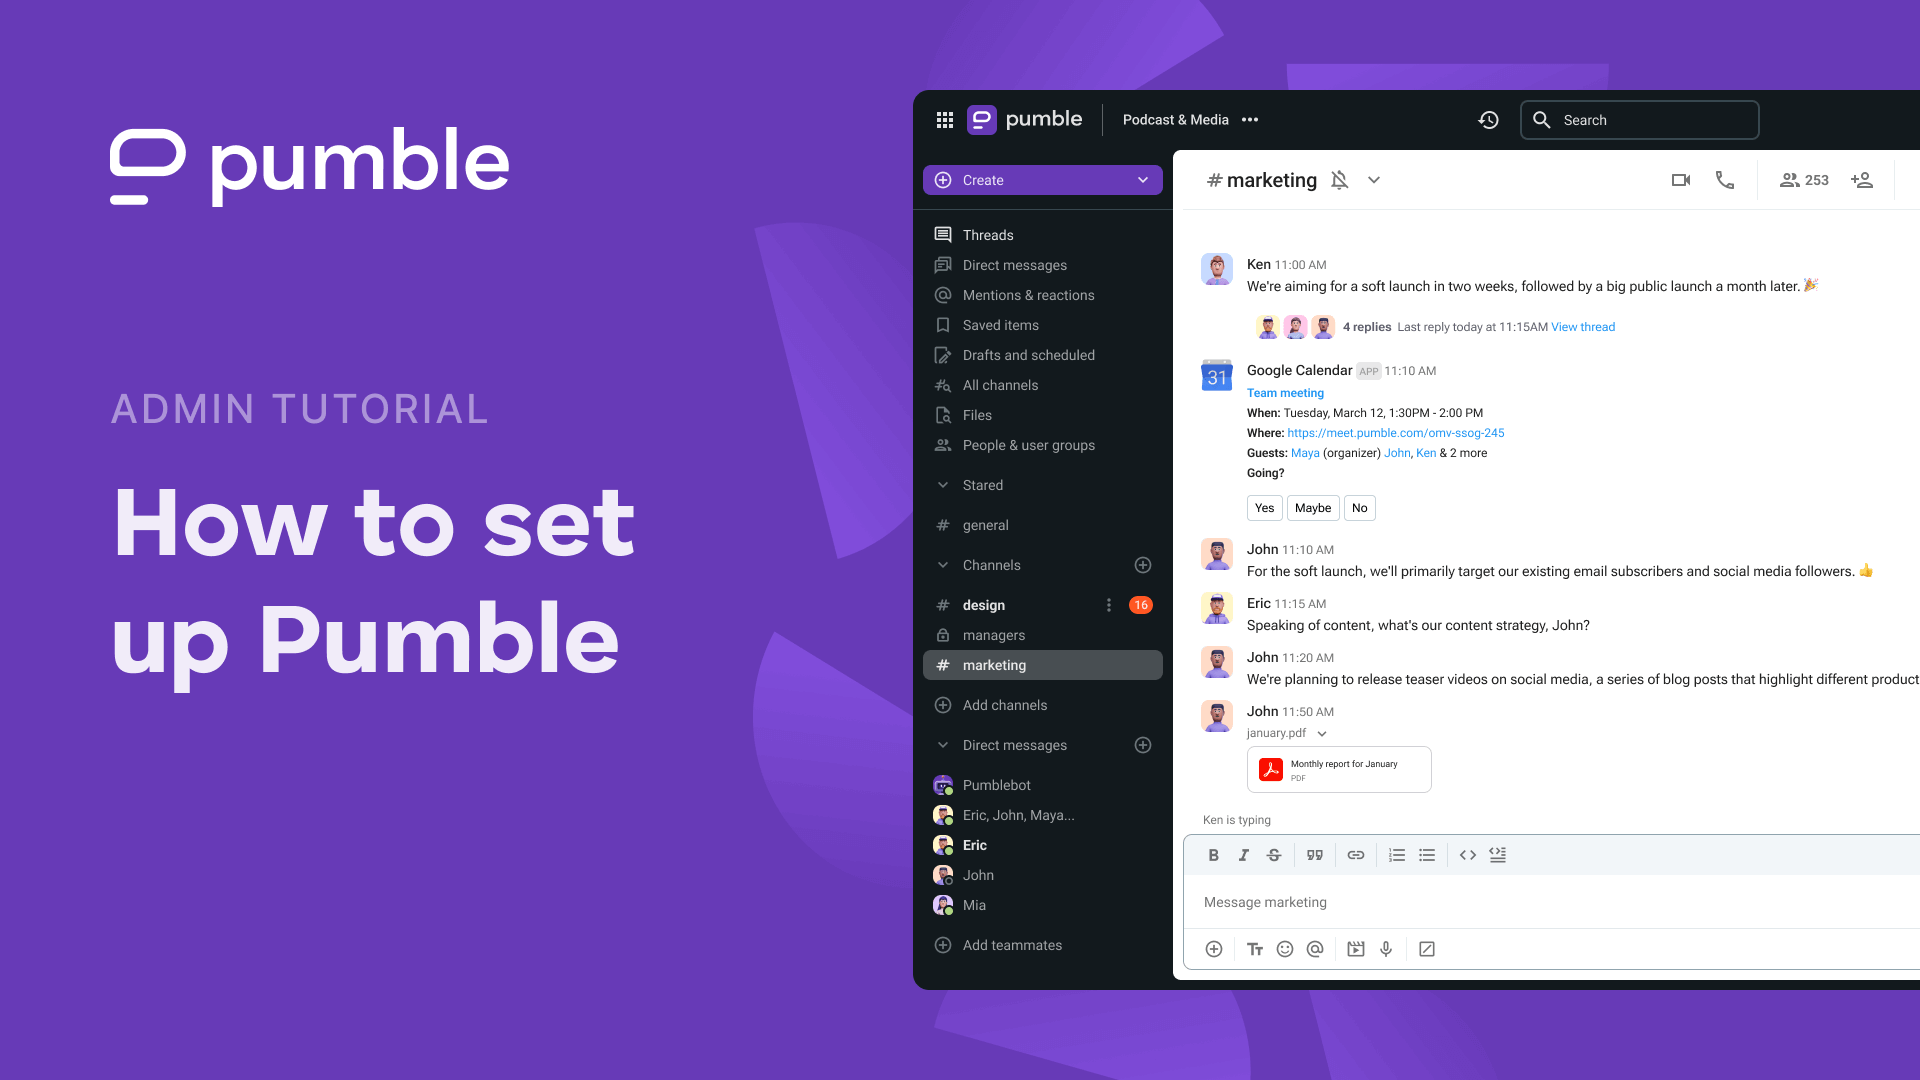 How to set up Pumble as an Admin